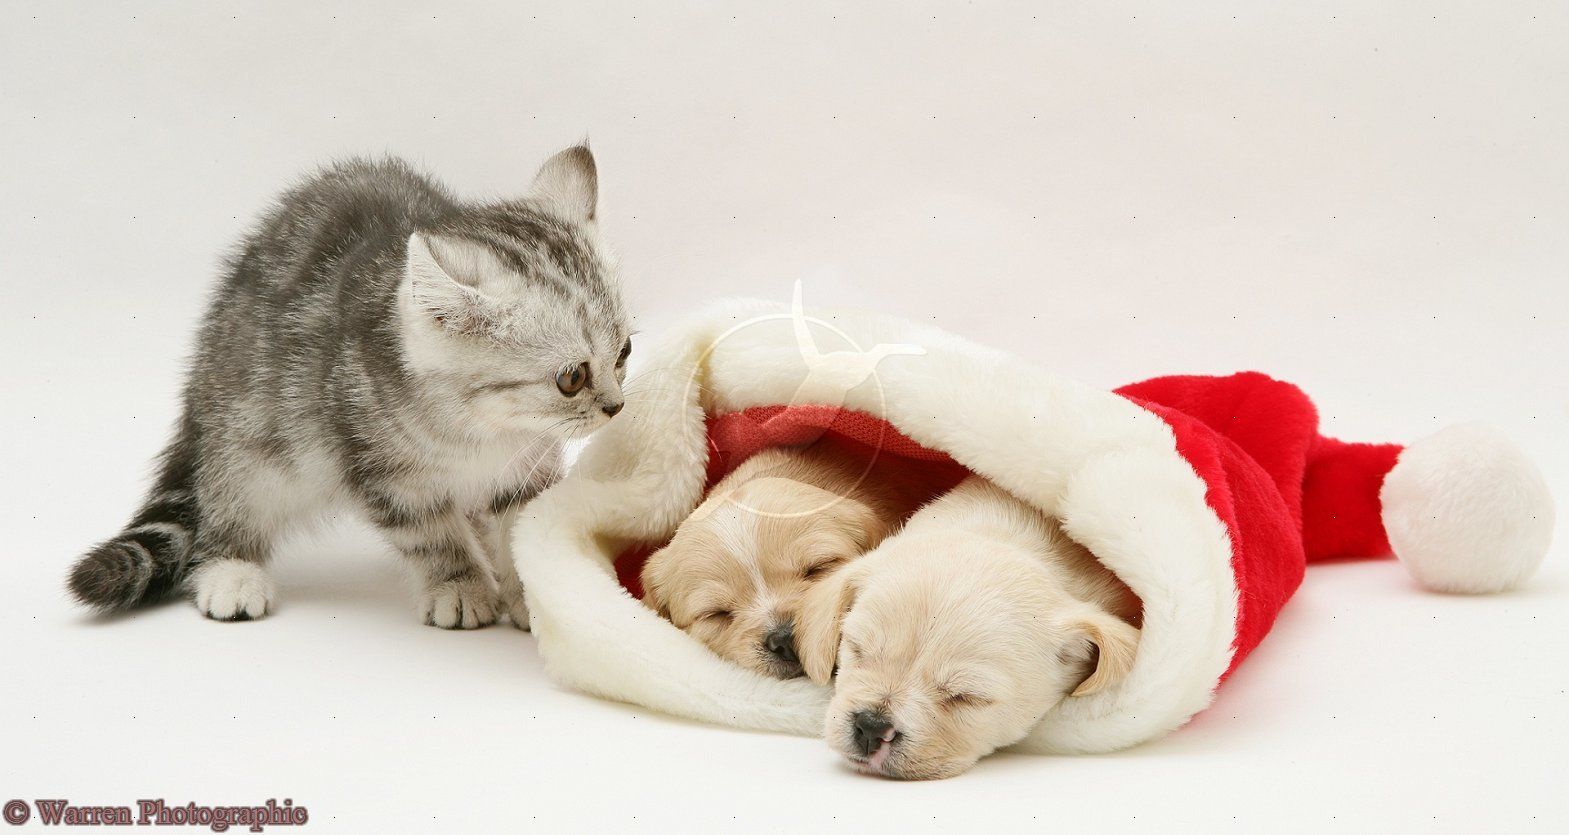 Wallpaper of Puppies and Kittens